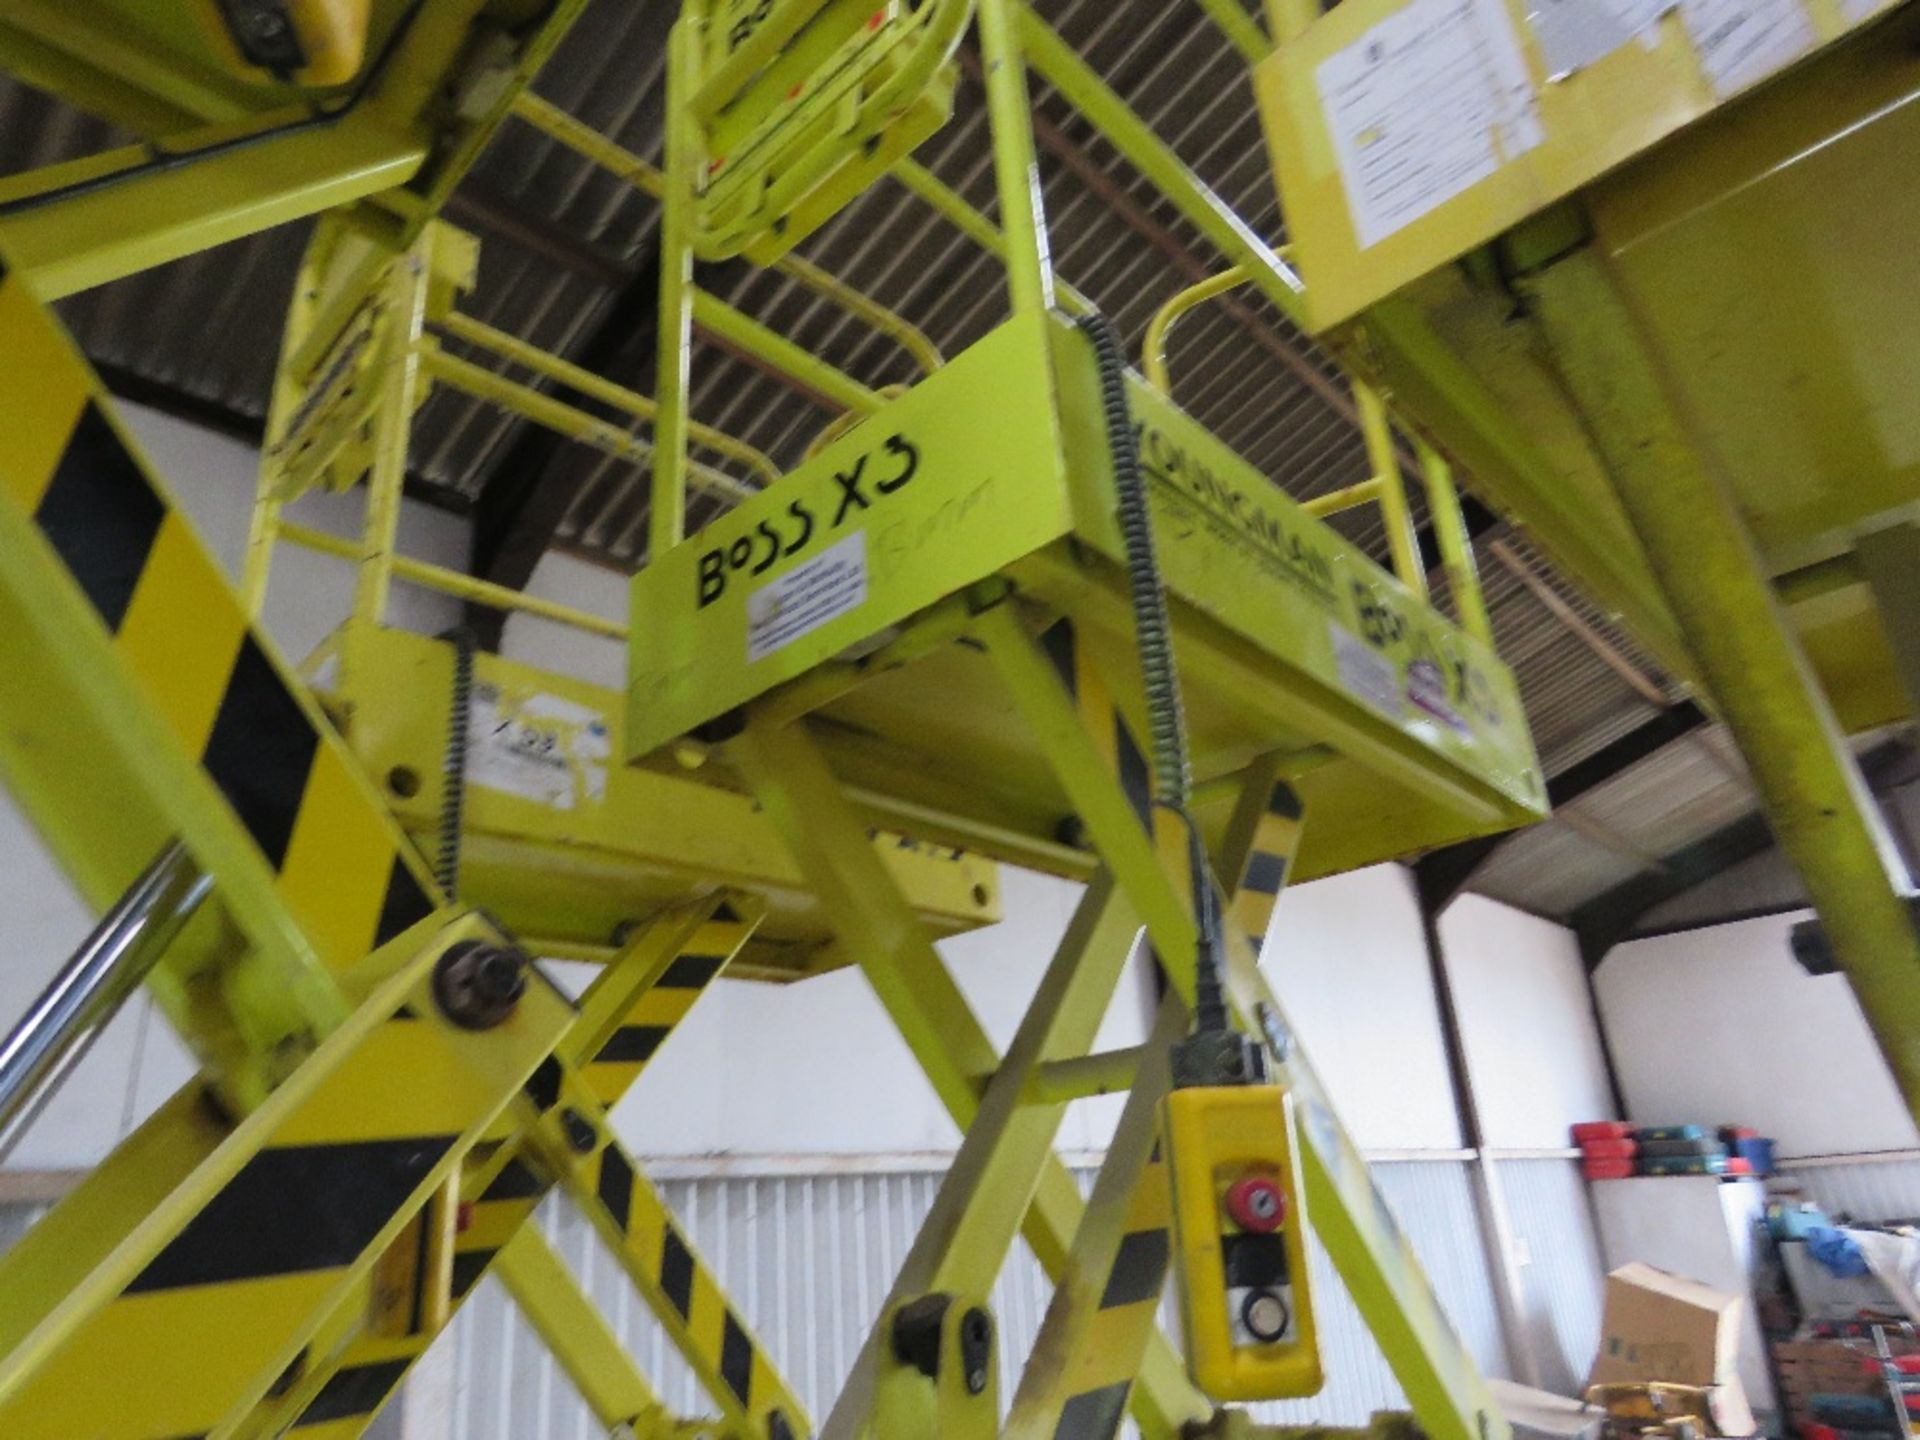 BOSS X3 SCISSOR LIFT ACCESS PLATFORM, YEAR 2013 BUILD. DIRECT FROM LOCAL COMPANY DUE TO A CHANGE IN